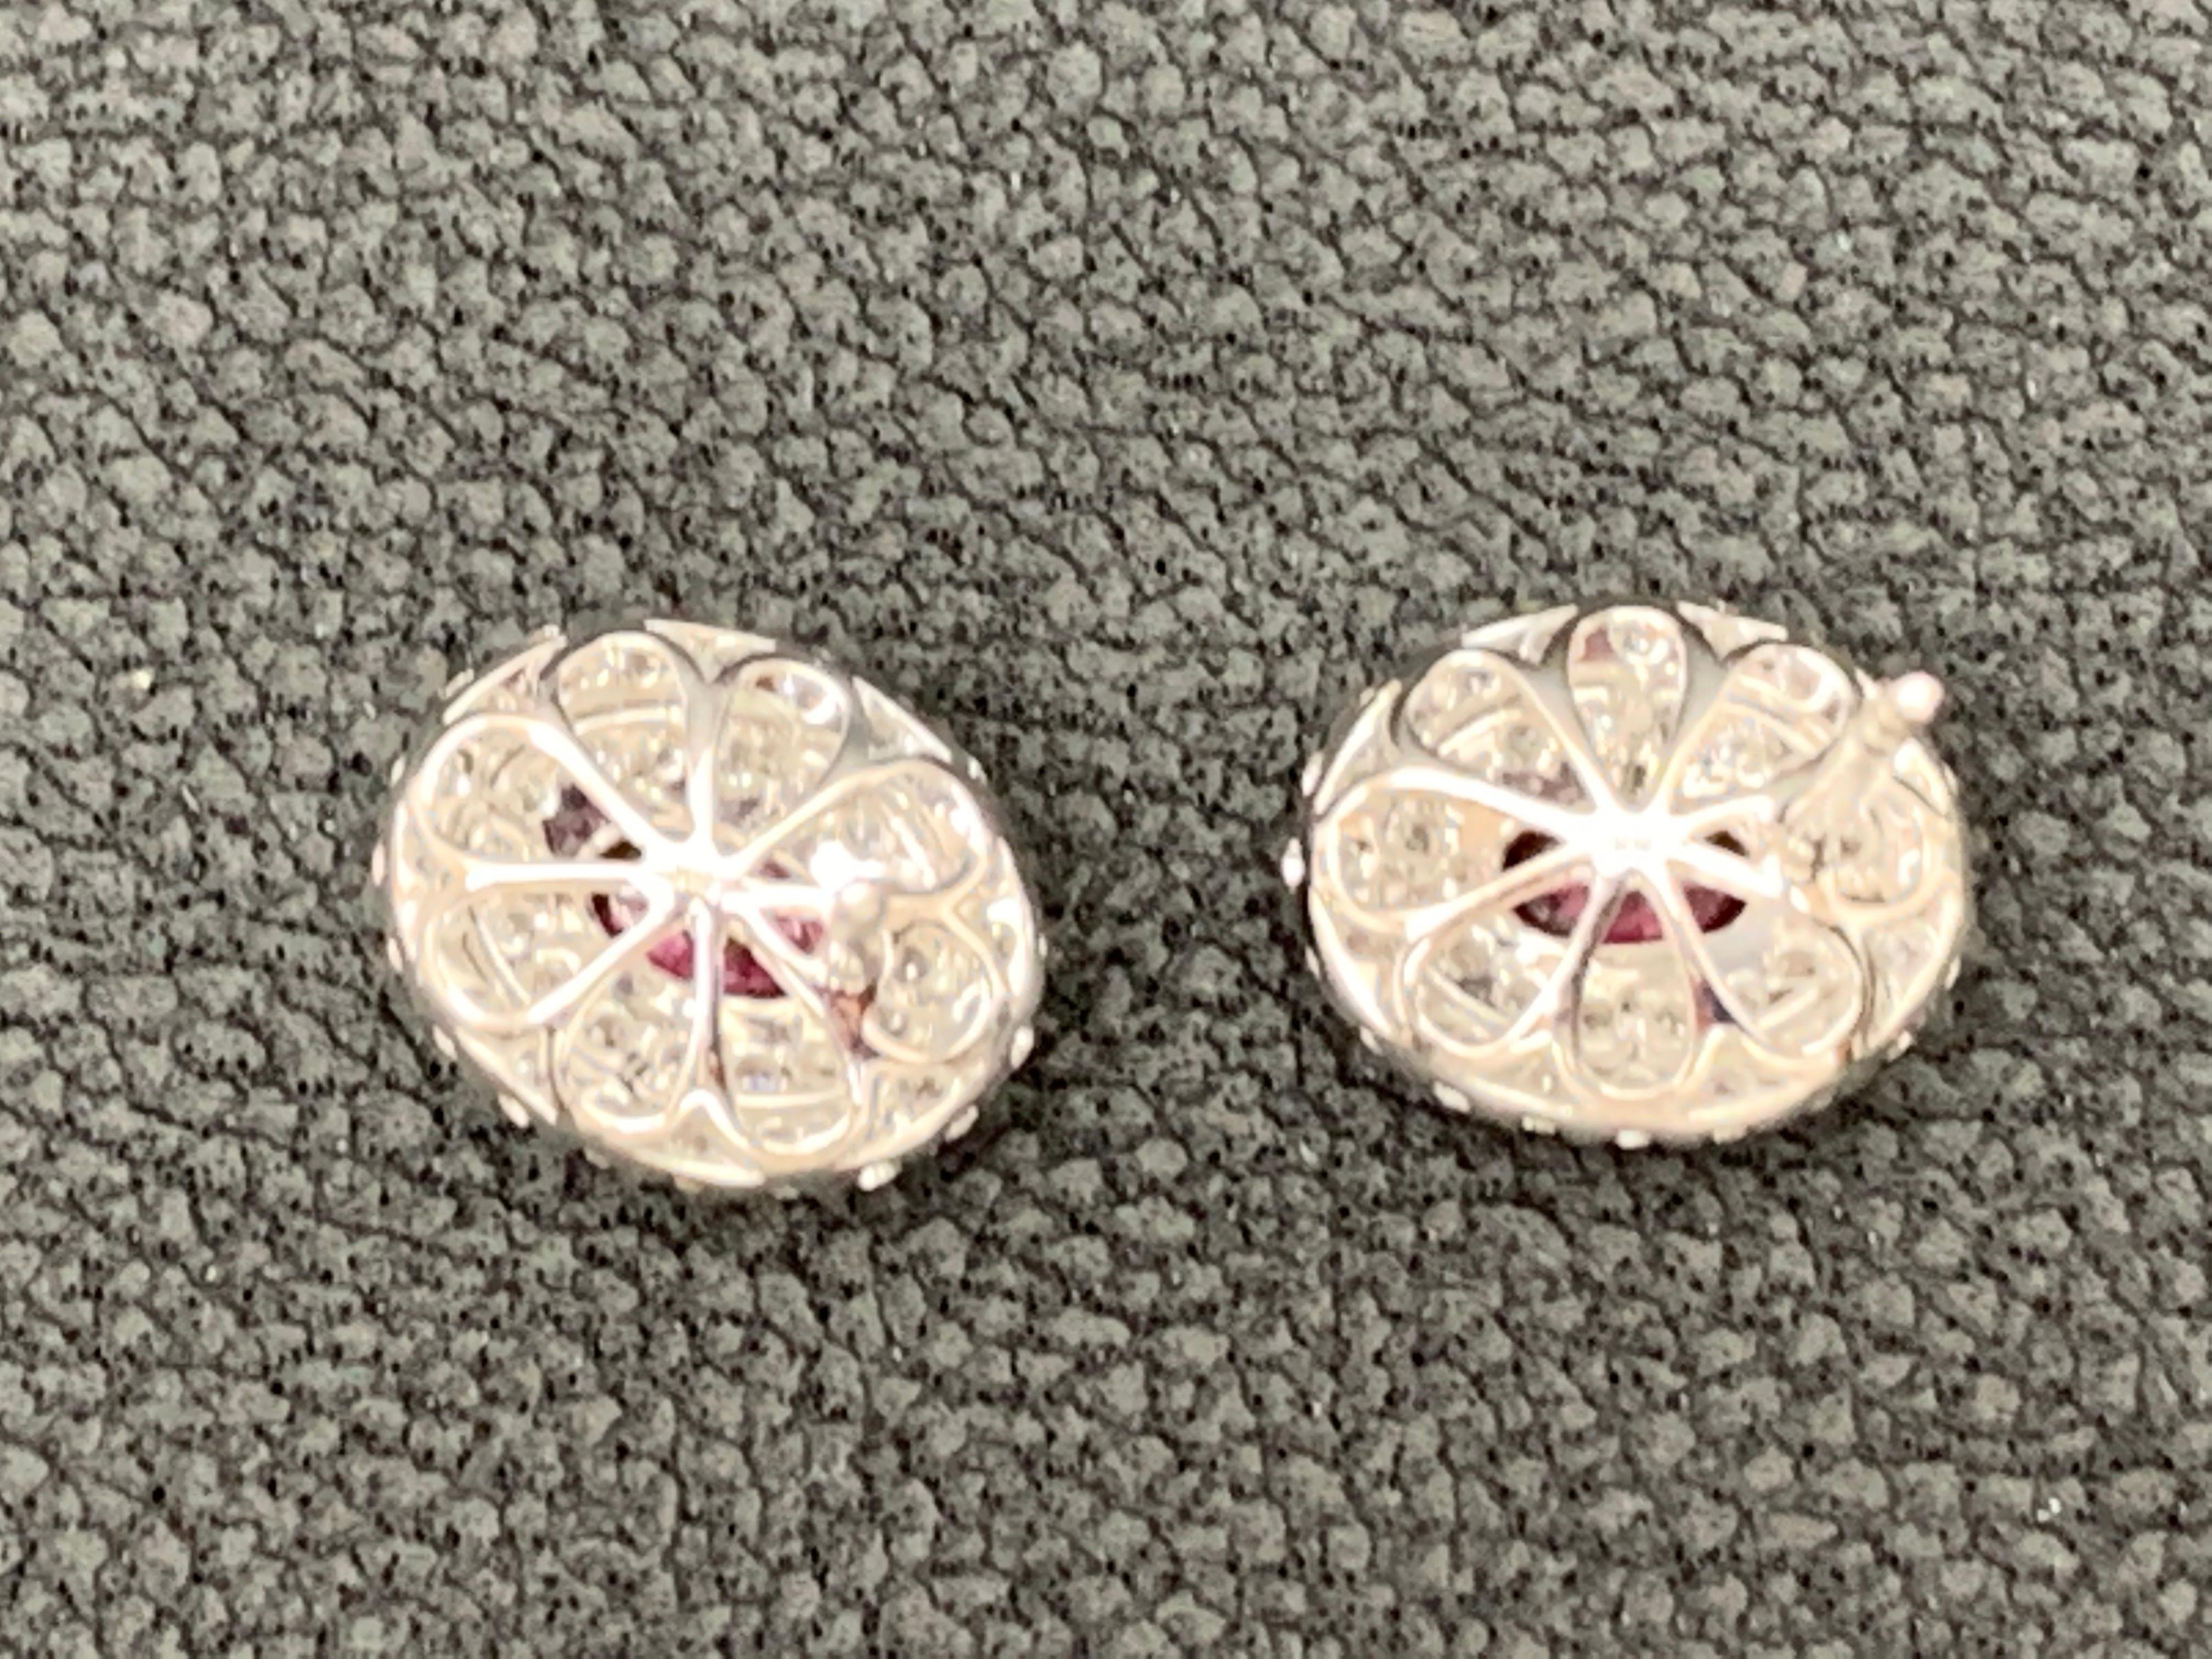 0.98 Carat Oval Cut Ruby and Diamond Stud Earrings in 18K White Gold For Sale 2